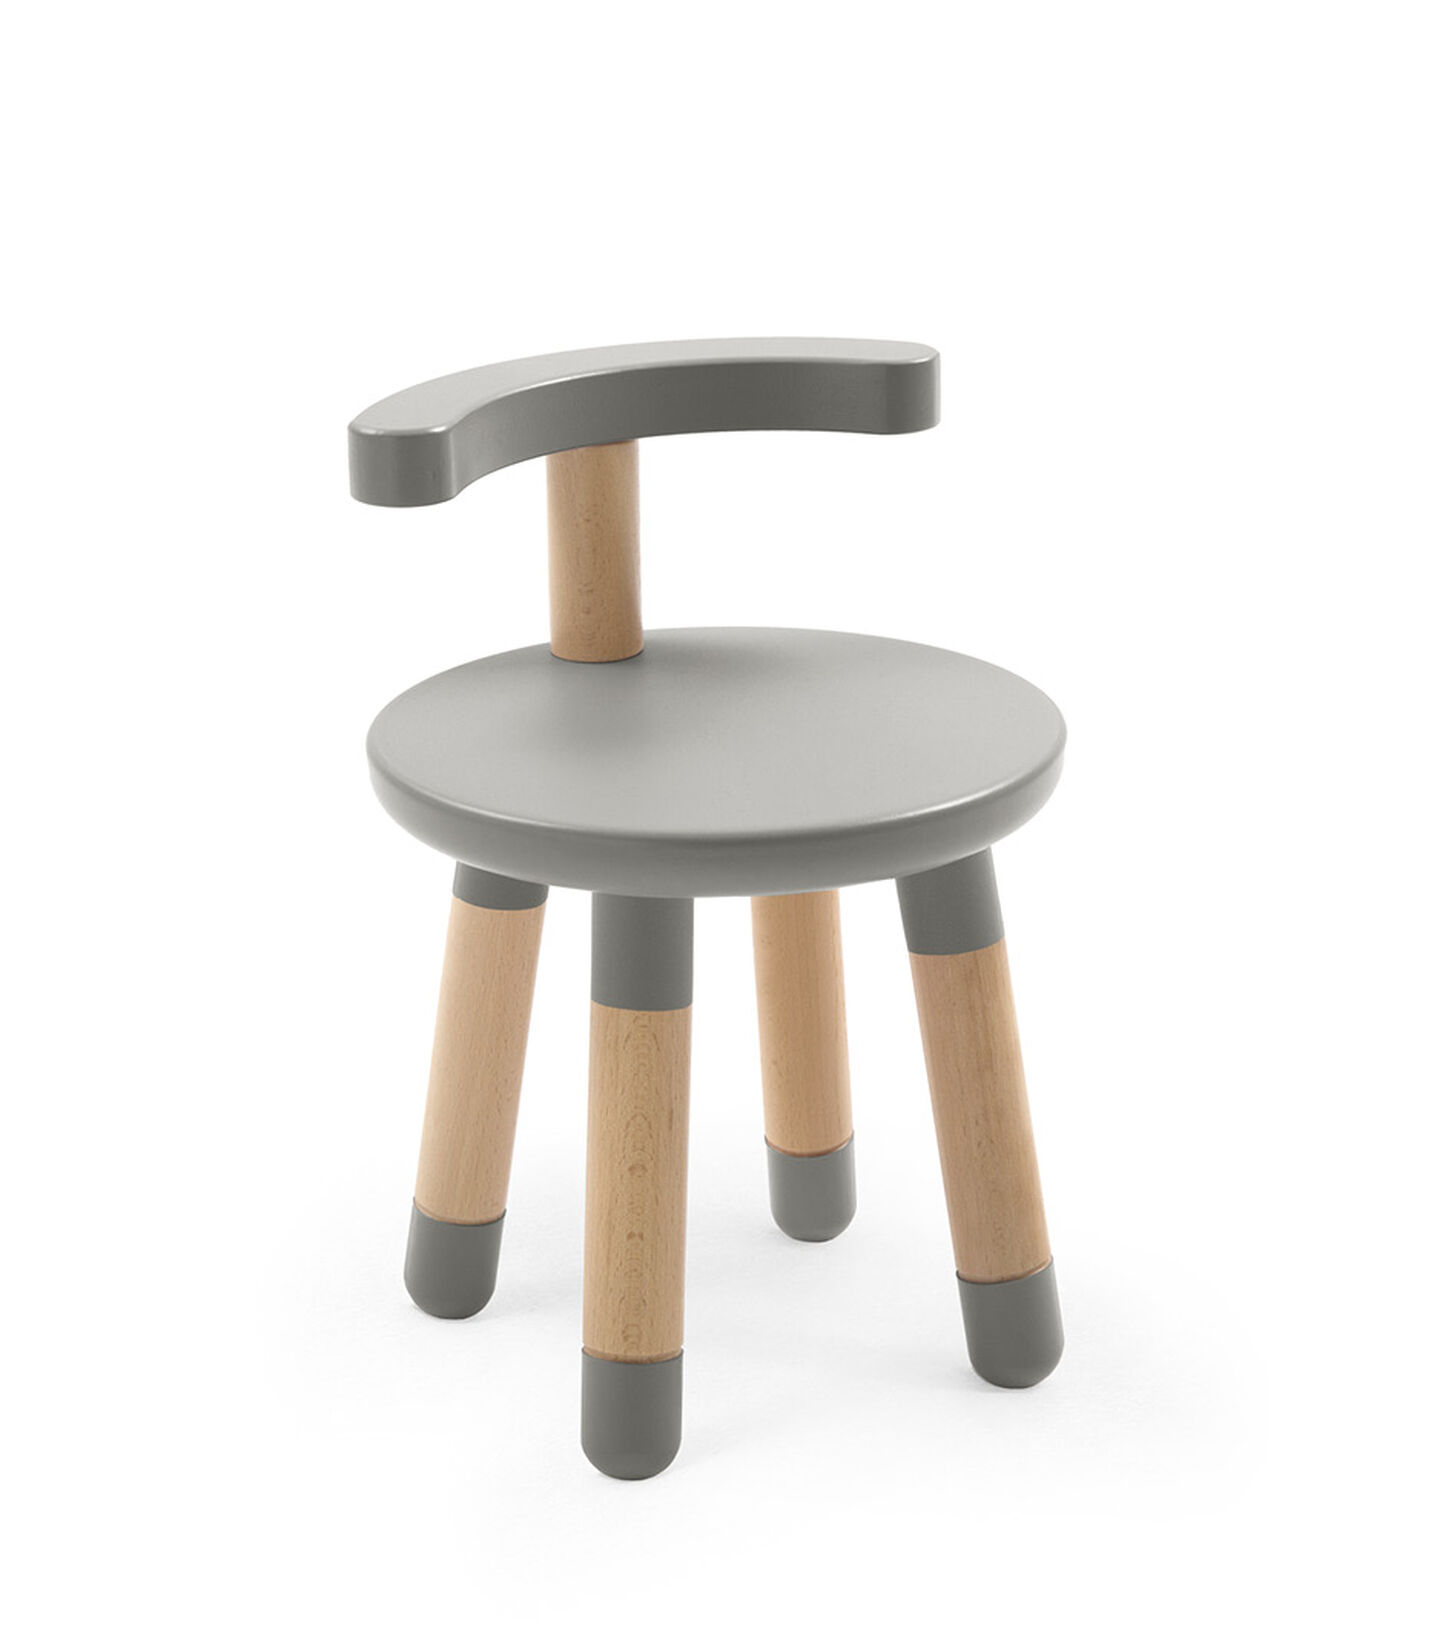 Stokke® MuTable™ Stol New Dove Grey, New Dove Grey, mainview view 2